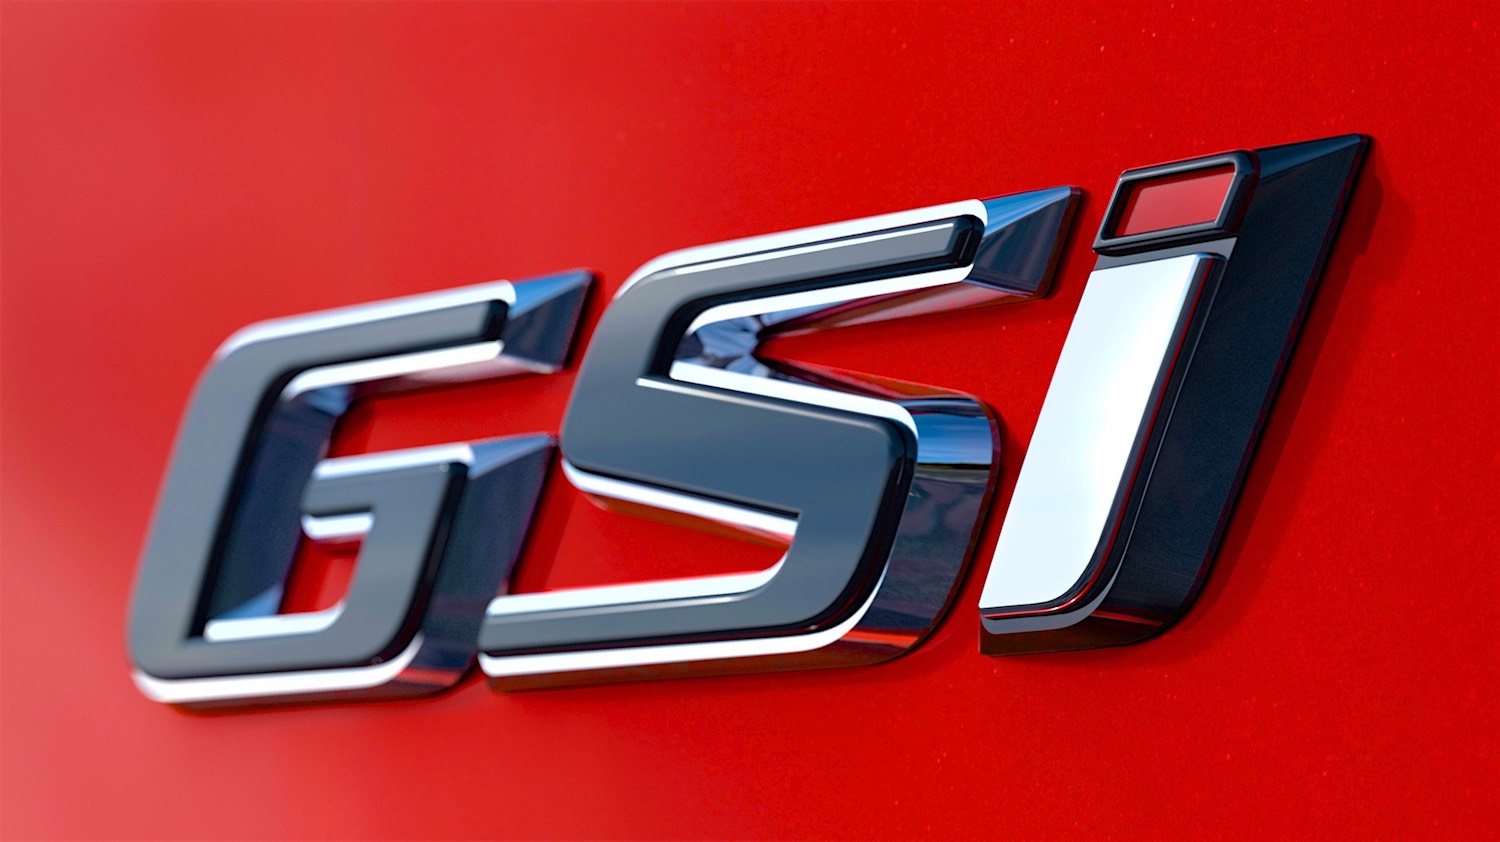 Tom Scanlan reviews the Vauxhall Insignia GSi Sportshatch for Drive 16